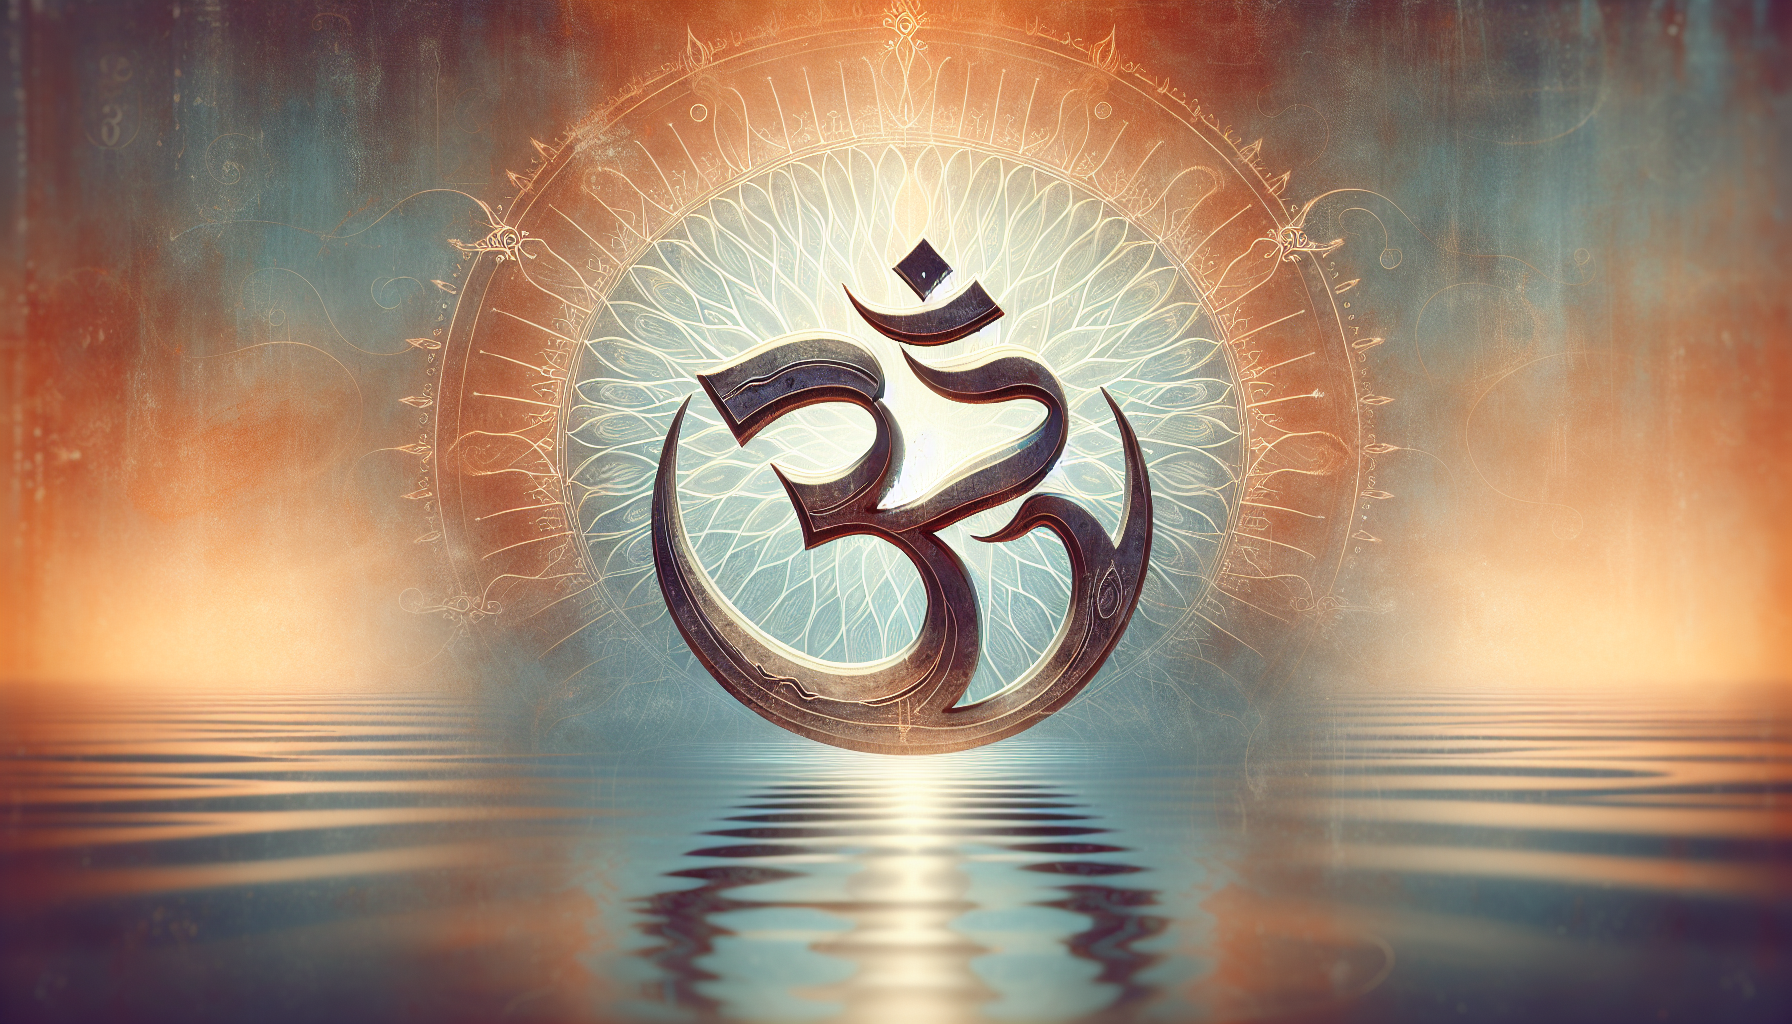 What Is The Symbol Of 🕉?